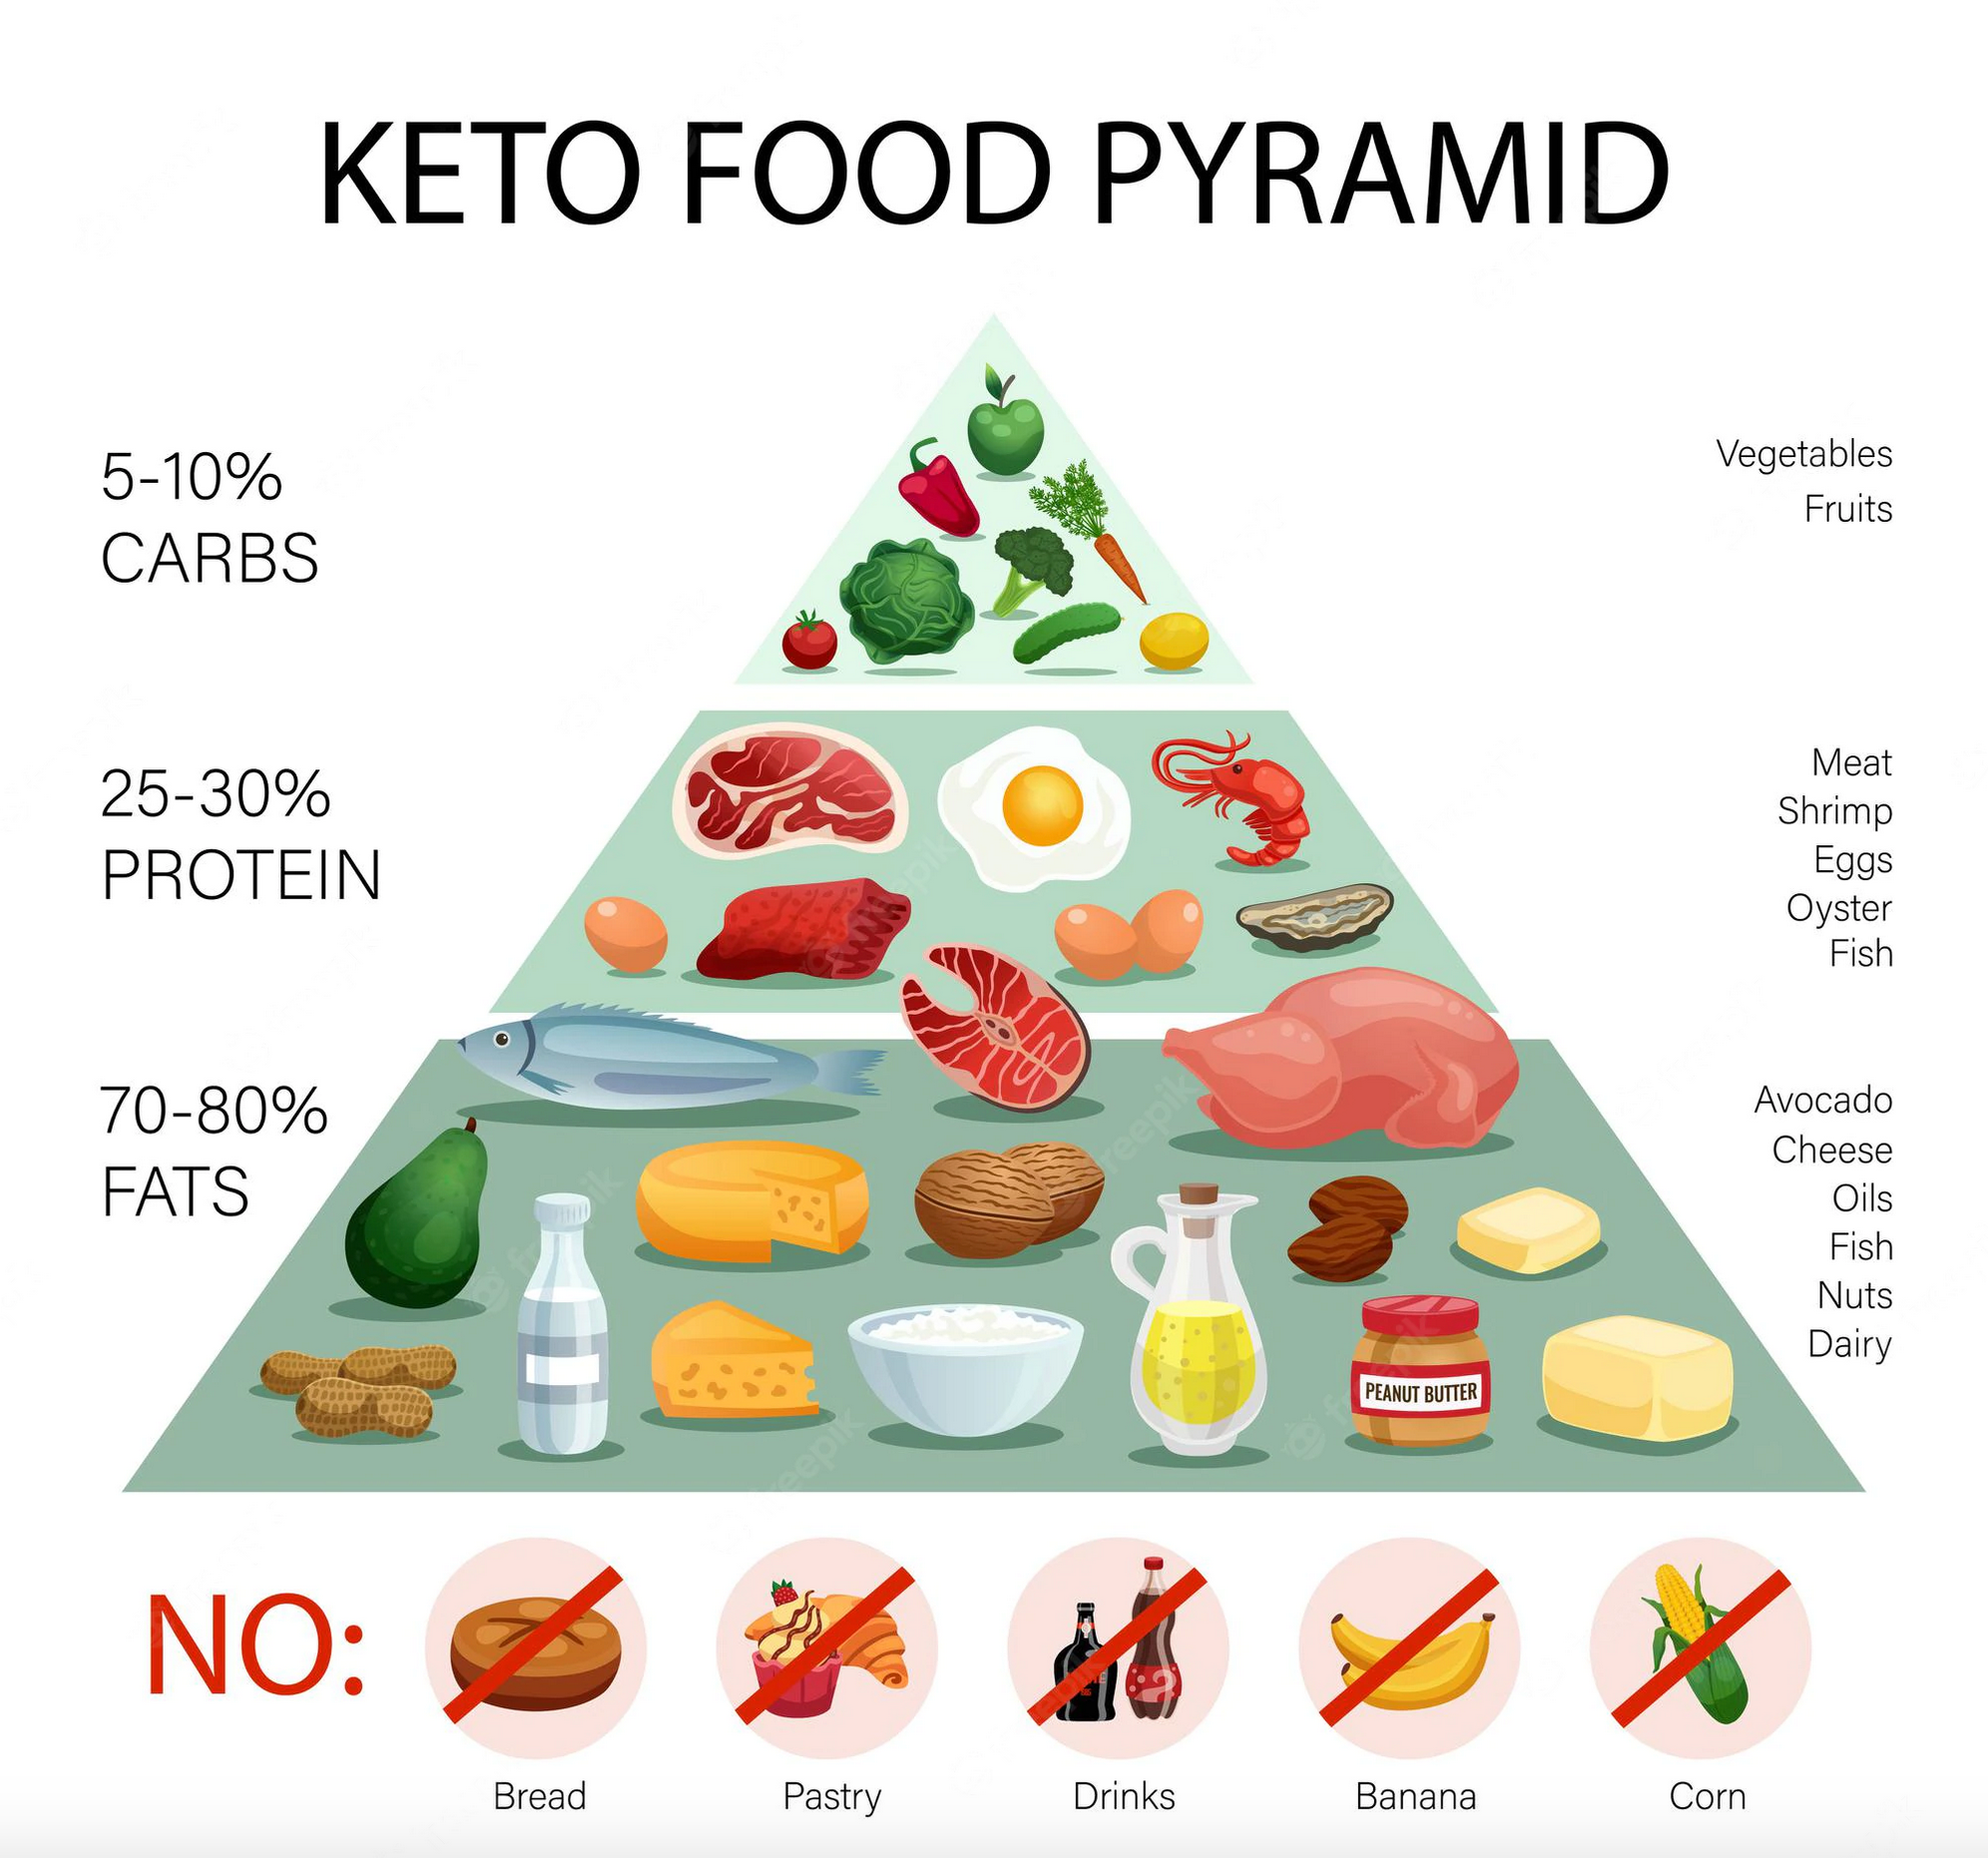 Eat meat everyday on keto